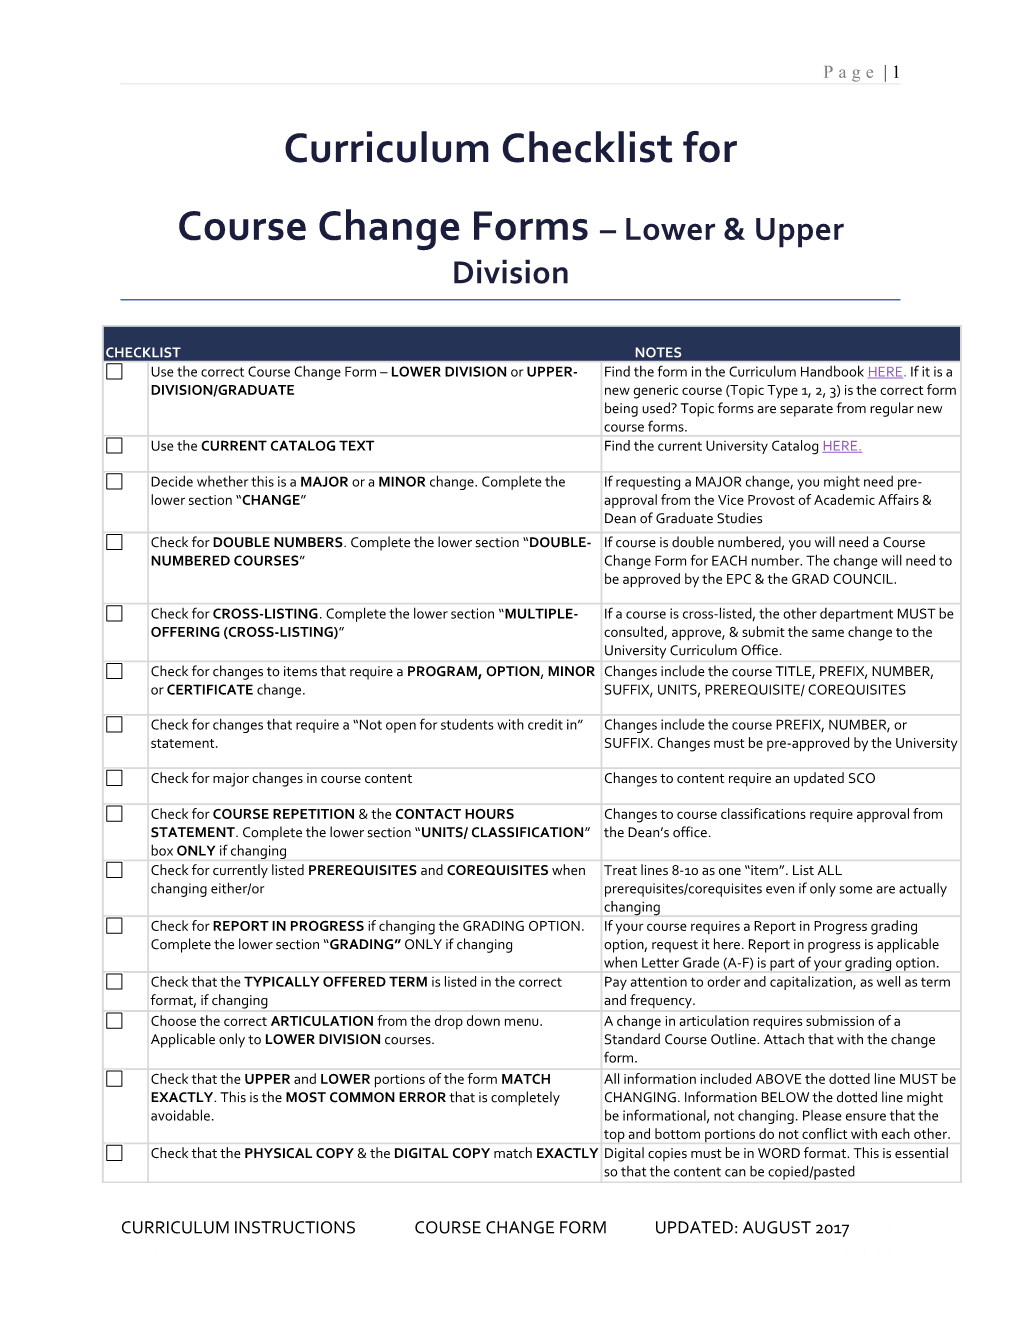 Course Change Forms Lower & Upper Division